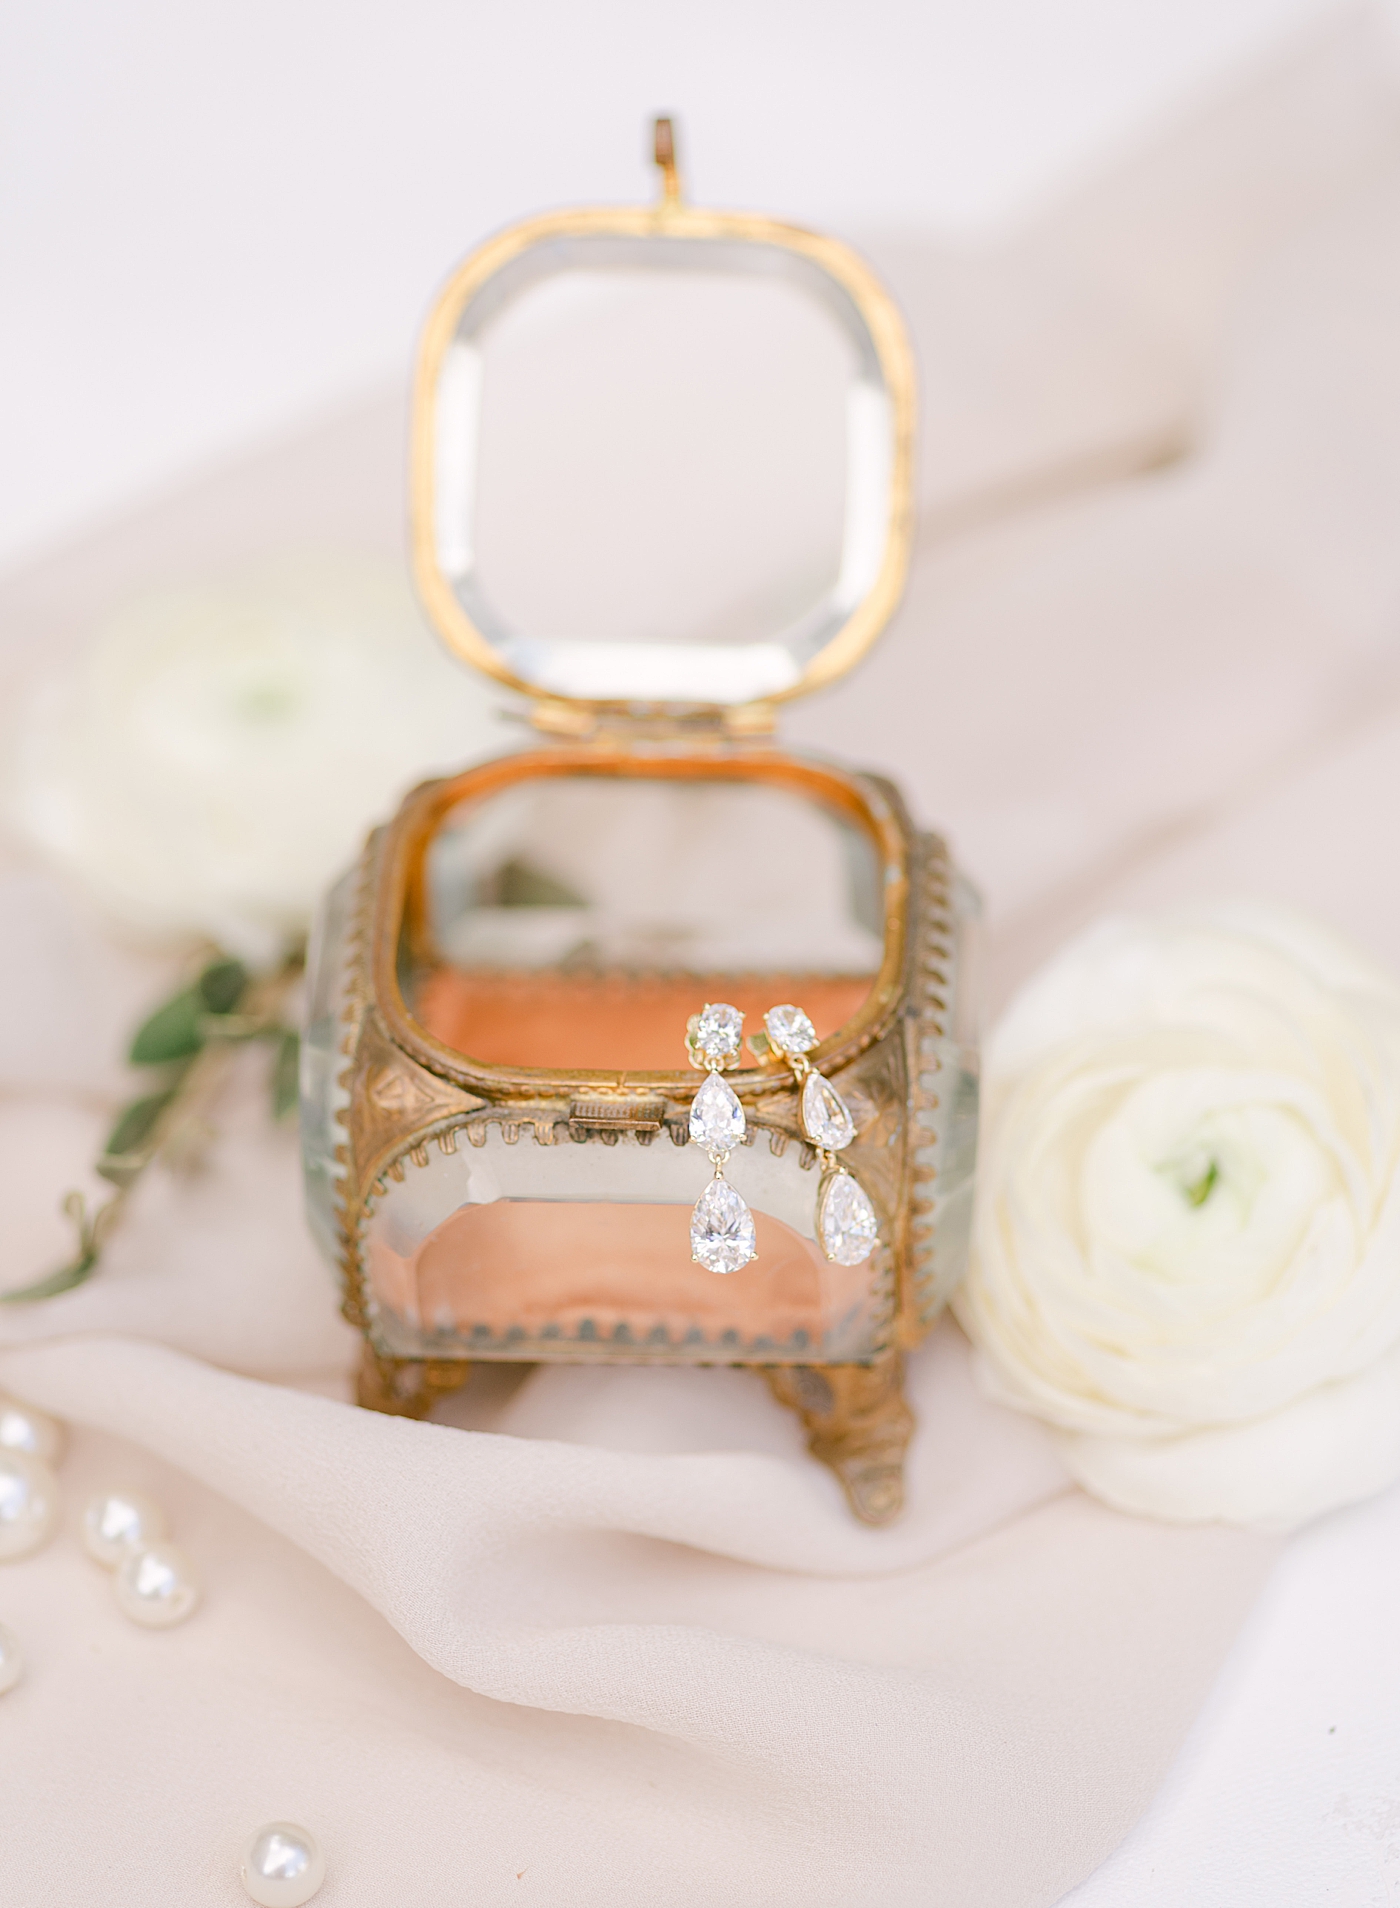 Bride's earrings in an antique glass box | Photo by Hope Helmuth Photography